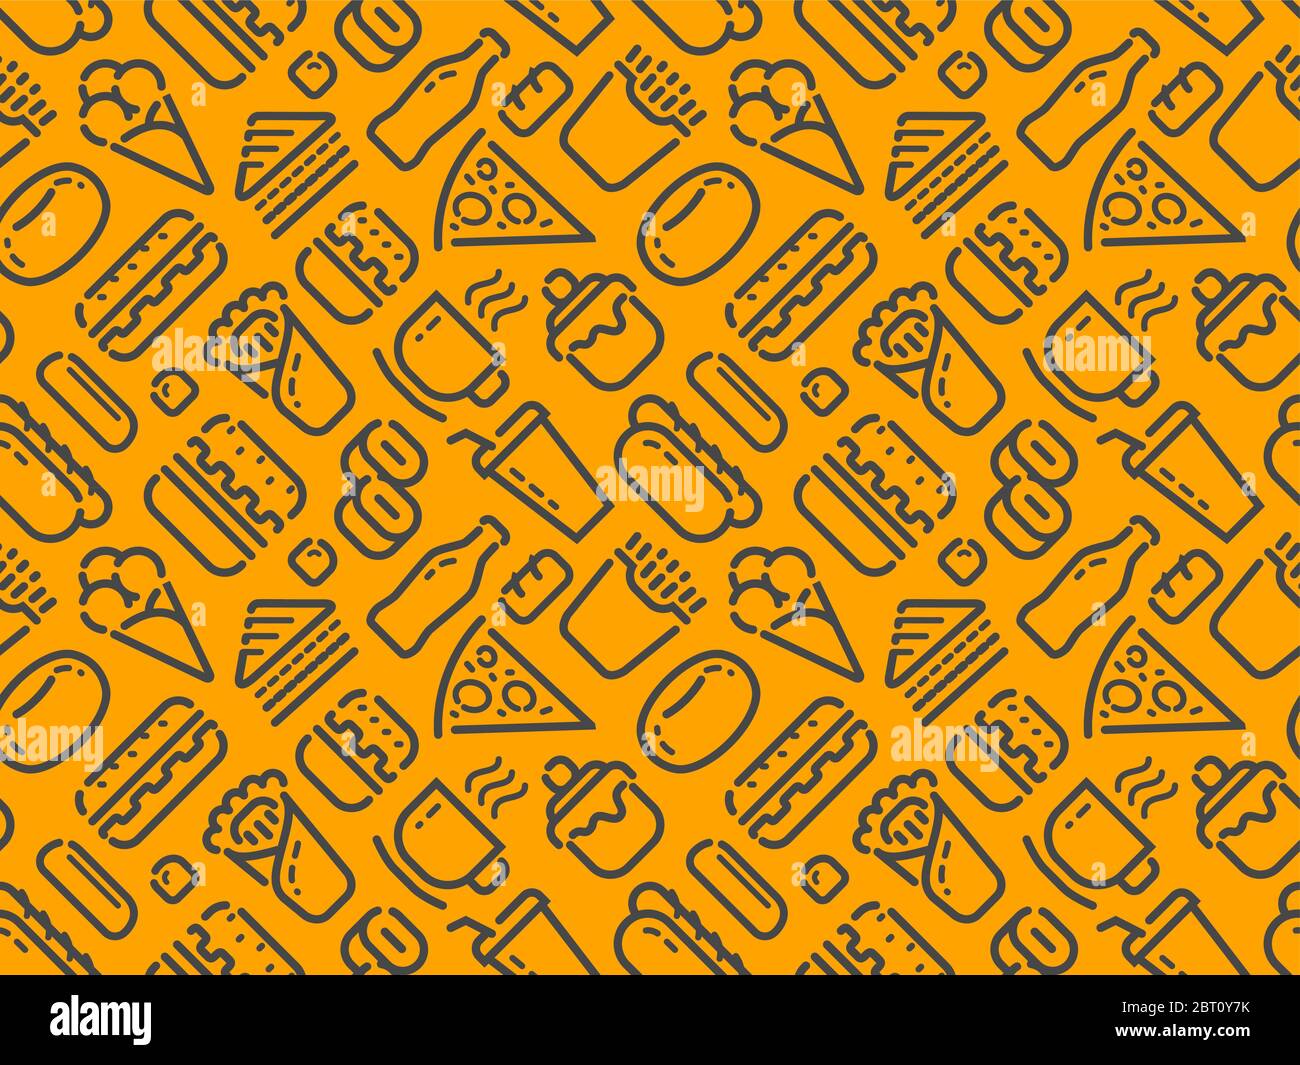 Food and drinks seamless background. Pattern vector illustration Stock Vector